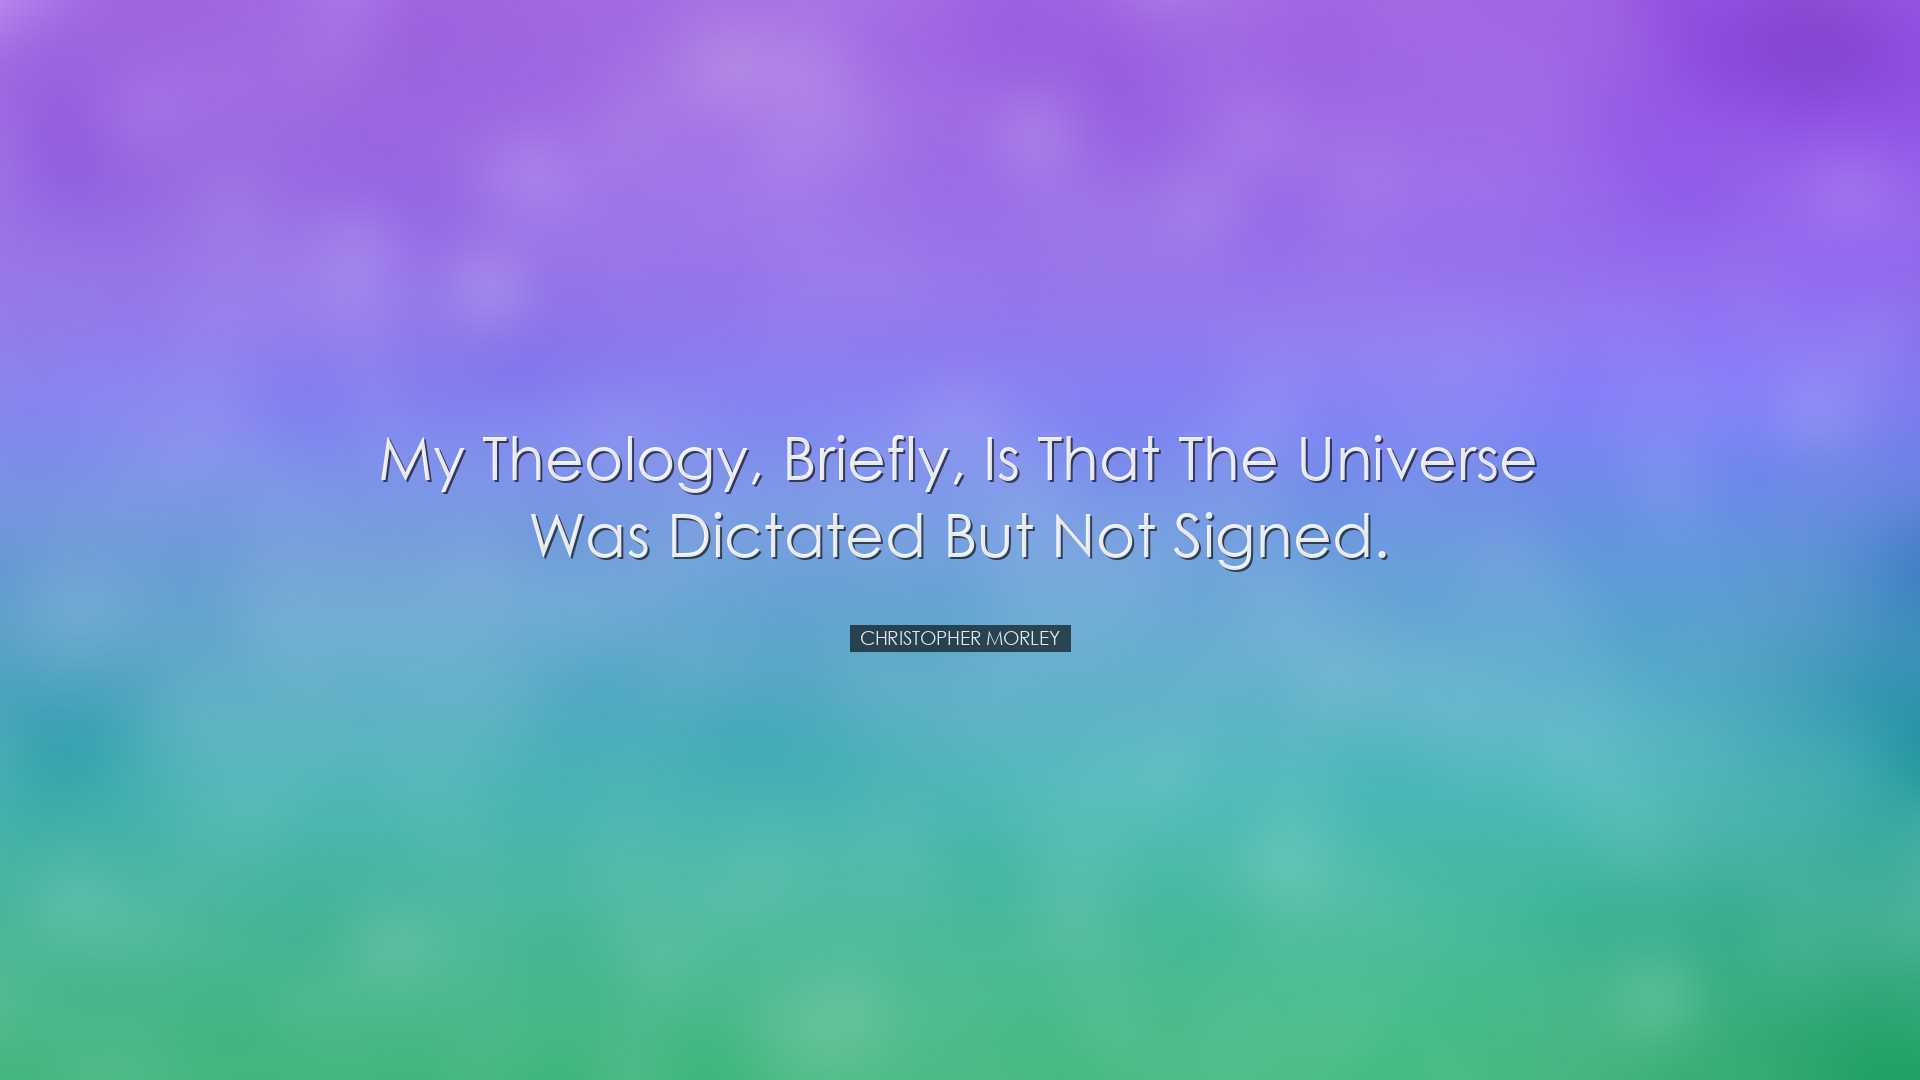 My theology, briefly, is that the universe was dictated but not si